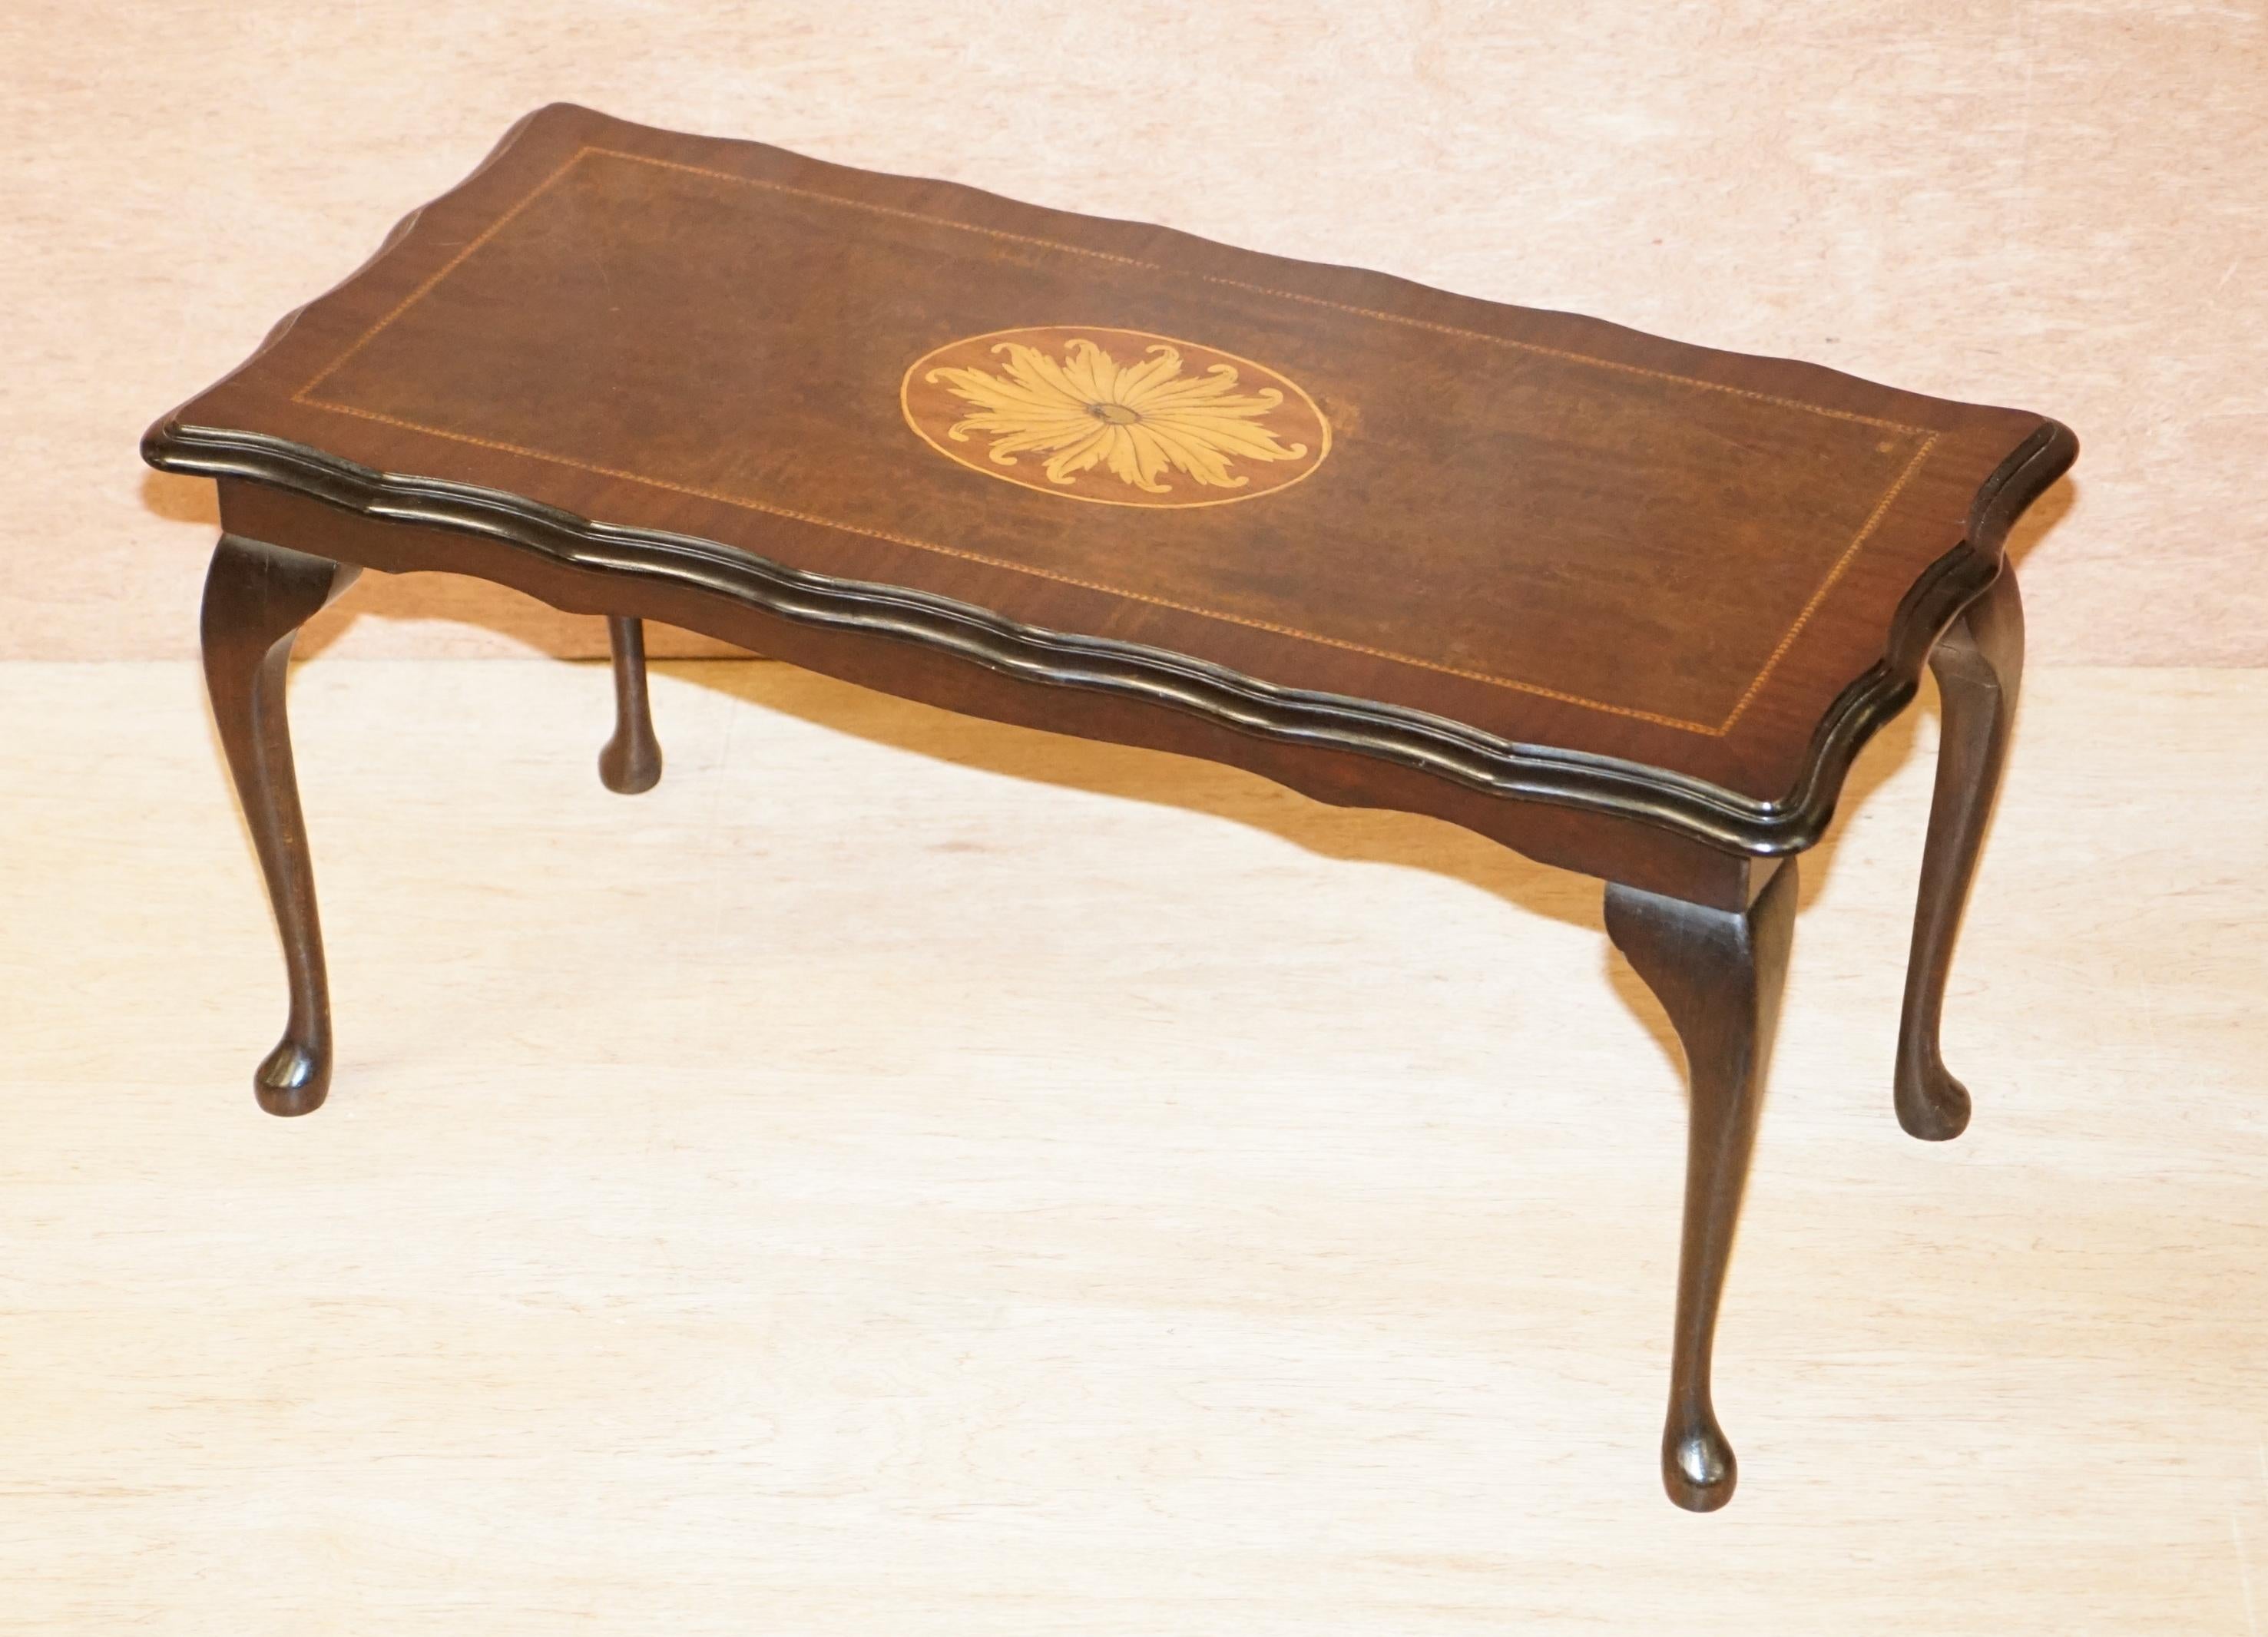 We are delighted to offer for sale this lovely vintage mahogany and satinwood inlaid Sheraton revival coffee or cocktail table

A very good looking and well made piece, the Sheraton revival inlay to the top is well executed and nicely elevates the